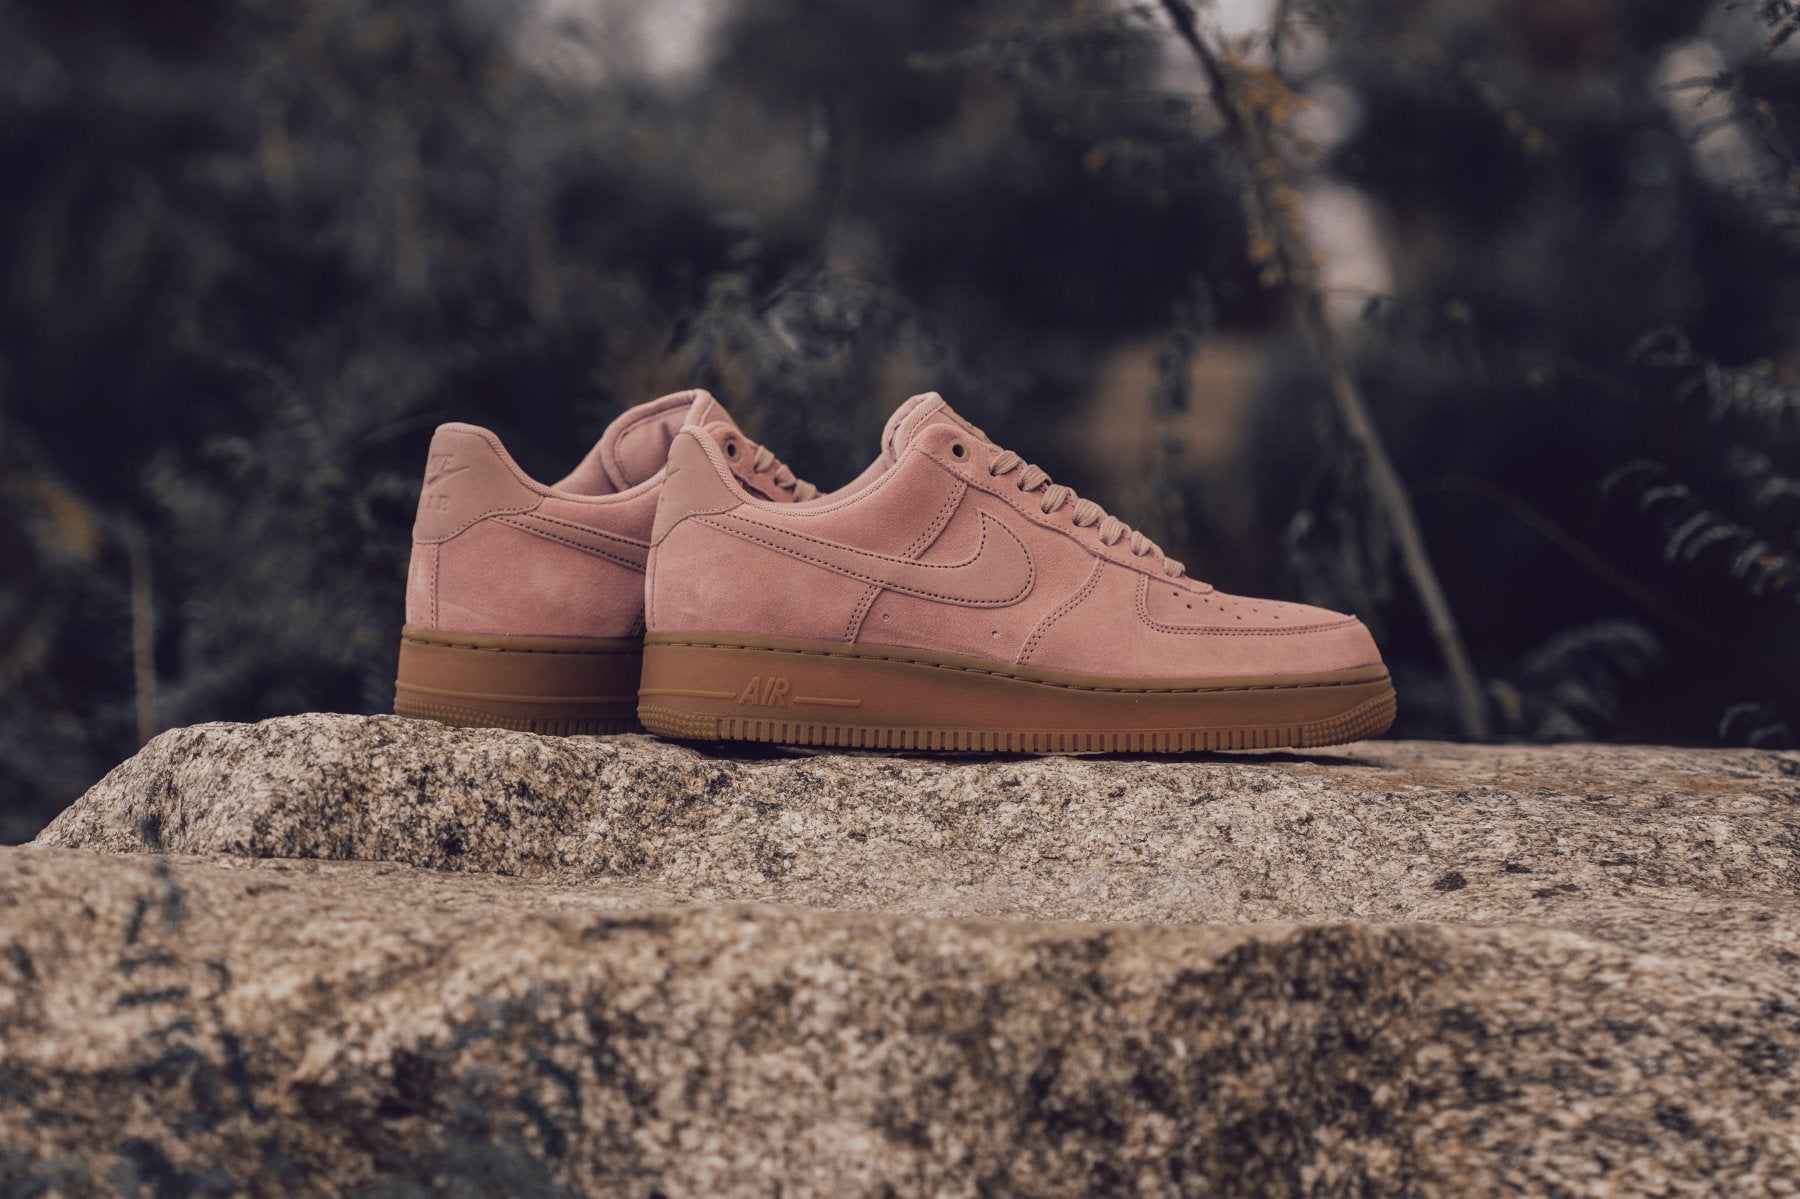 Nike Air 1 Suede 'Particle Pink' Available Now – Feature